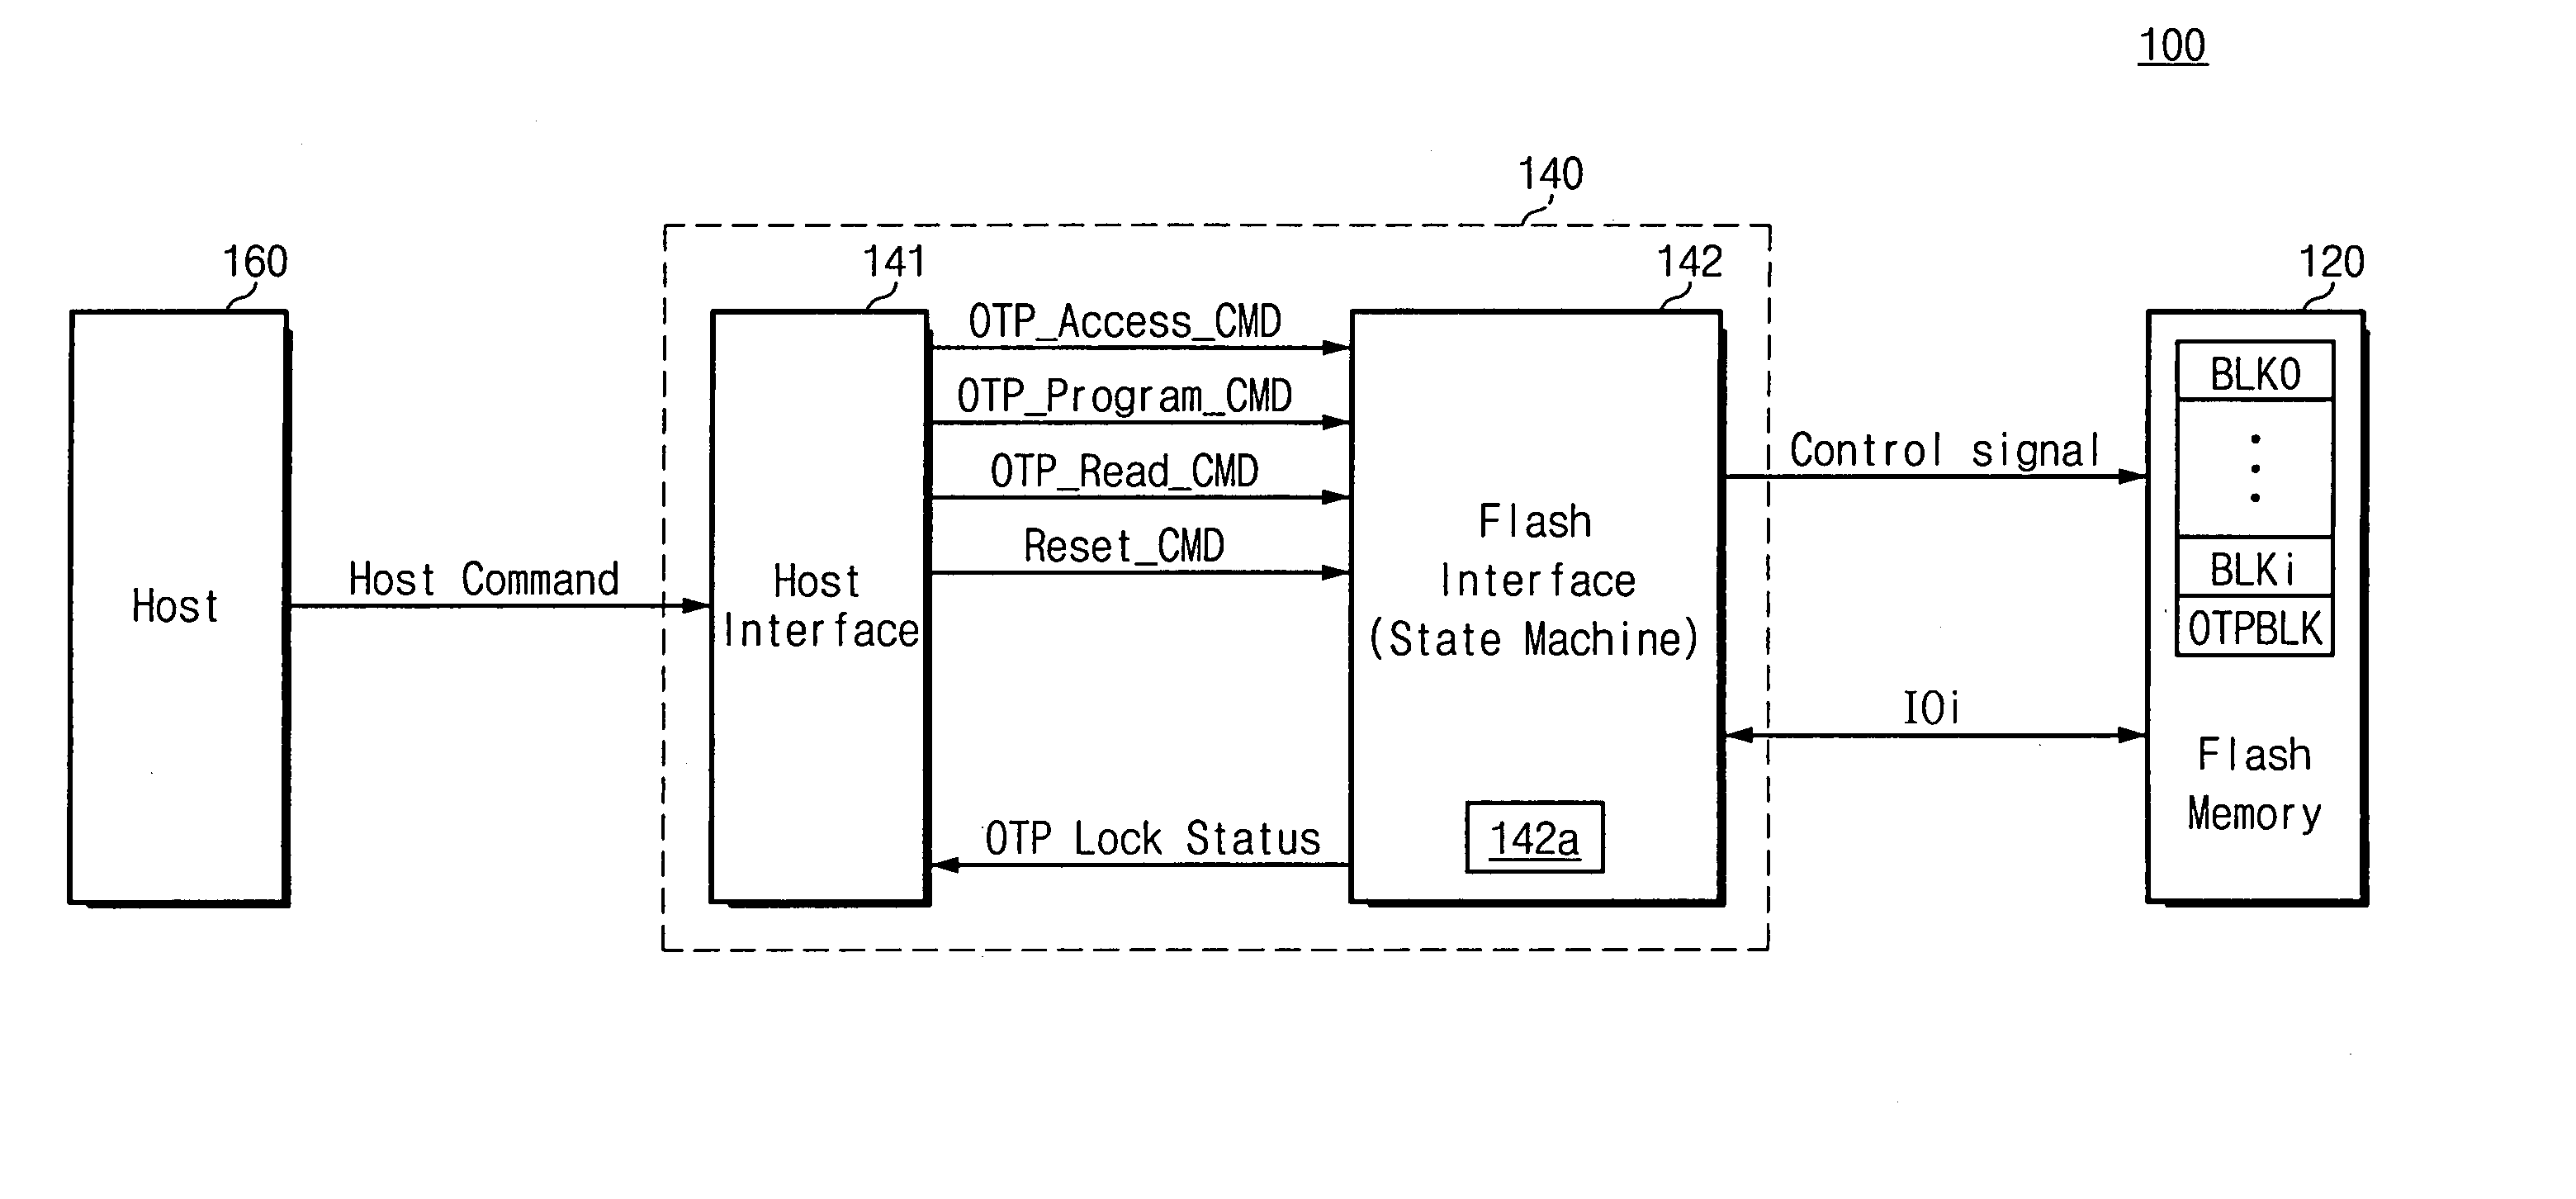 Memory system having flash memory where a one-time programmable block is included